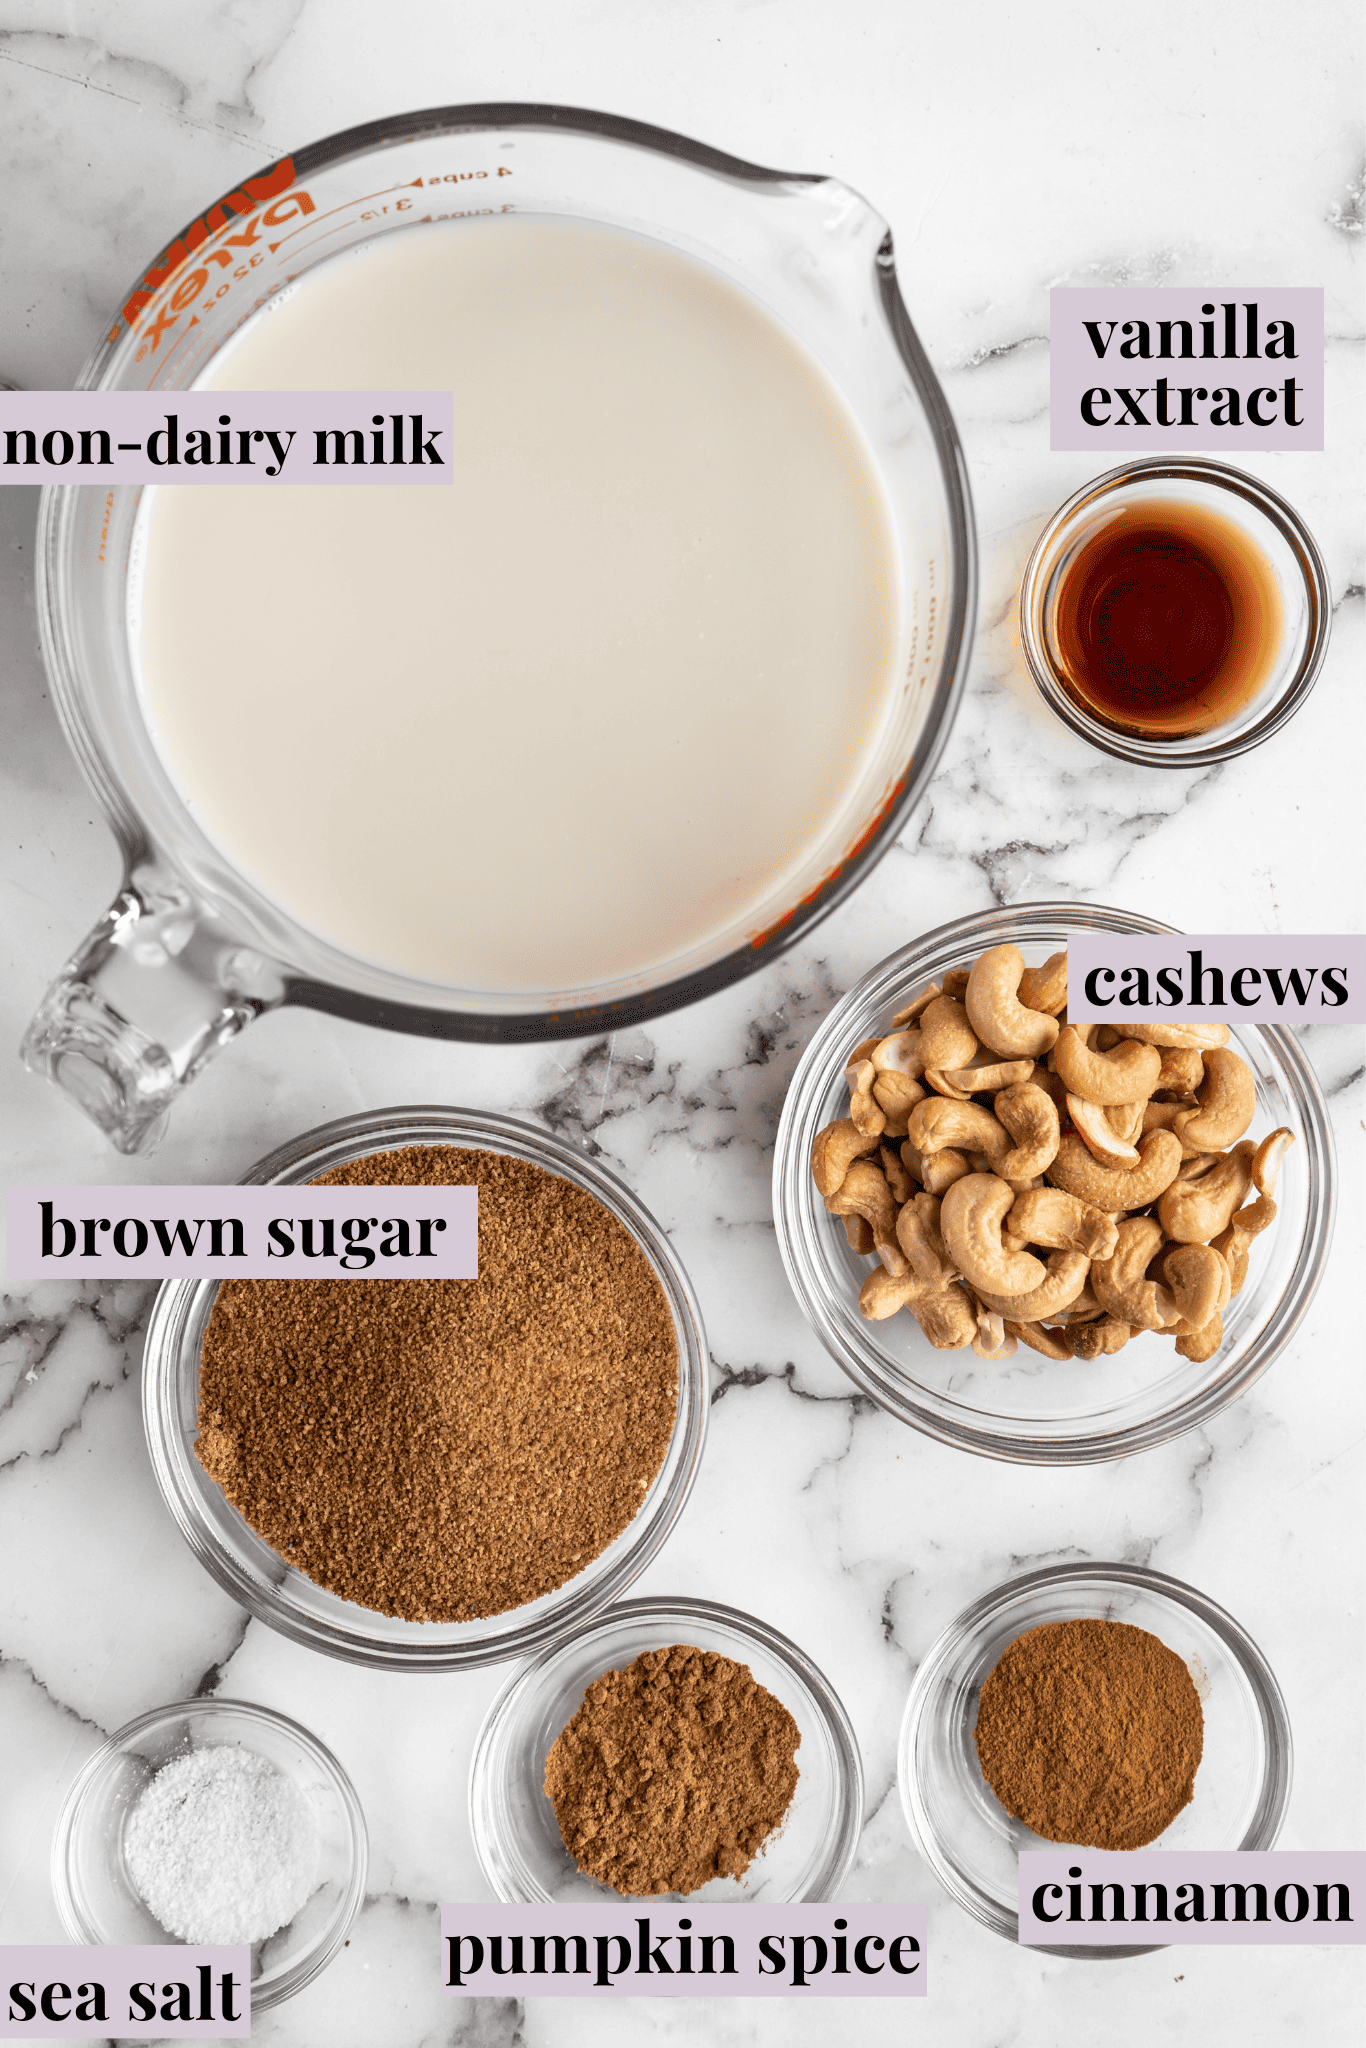 Overhead view of the labeled ingredients needed for vegan eggnog: non-dairy milk, vanilla extract, cashews, brown sugar, salt, cinnamon, and pumpkin spice